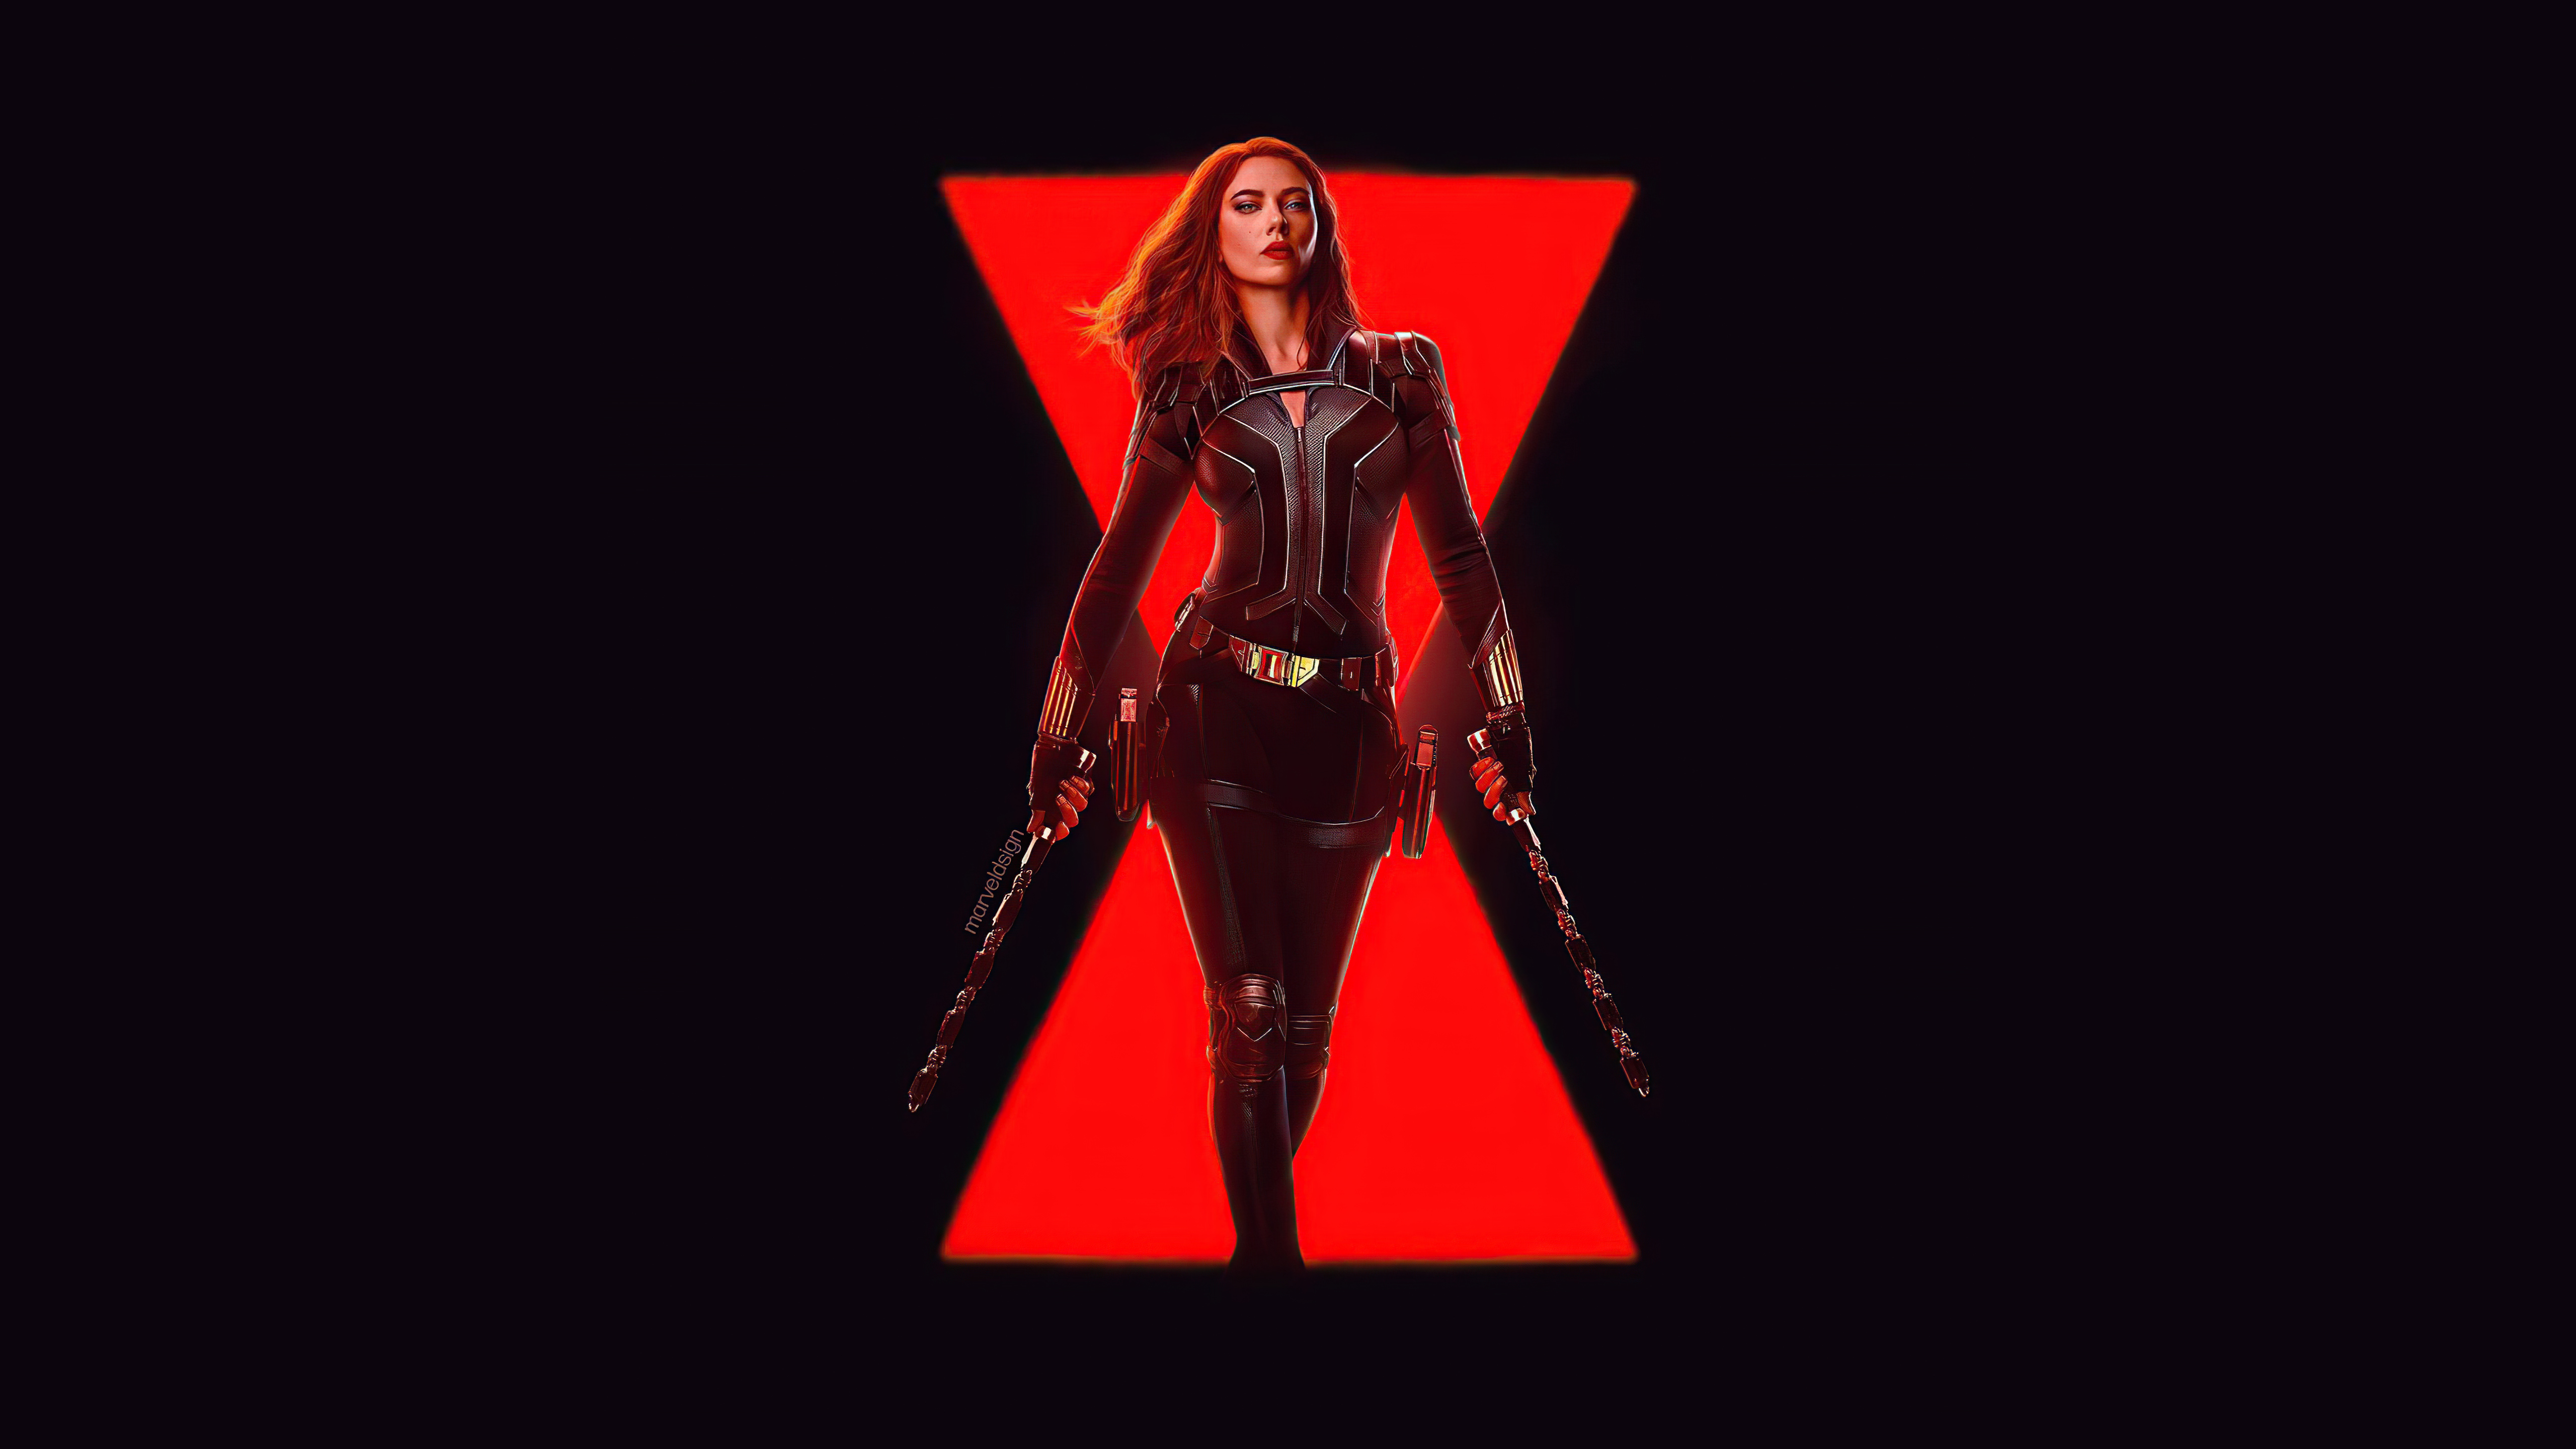 19x Black Widow 4k Ultra Hd 19x Resolution Wallpaper Hd Movies 4k Wallpapers Images Photos And Background Wallpapers Den